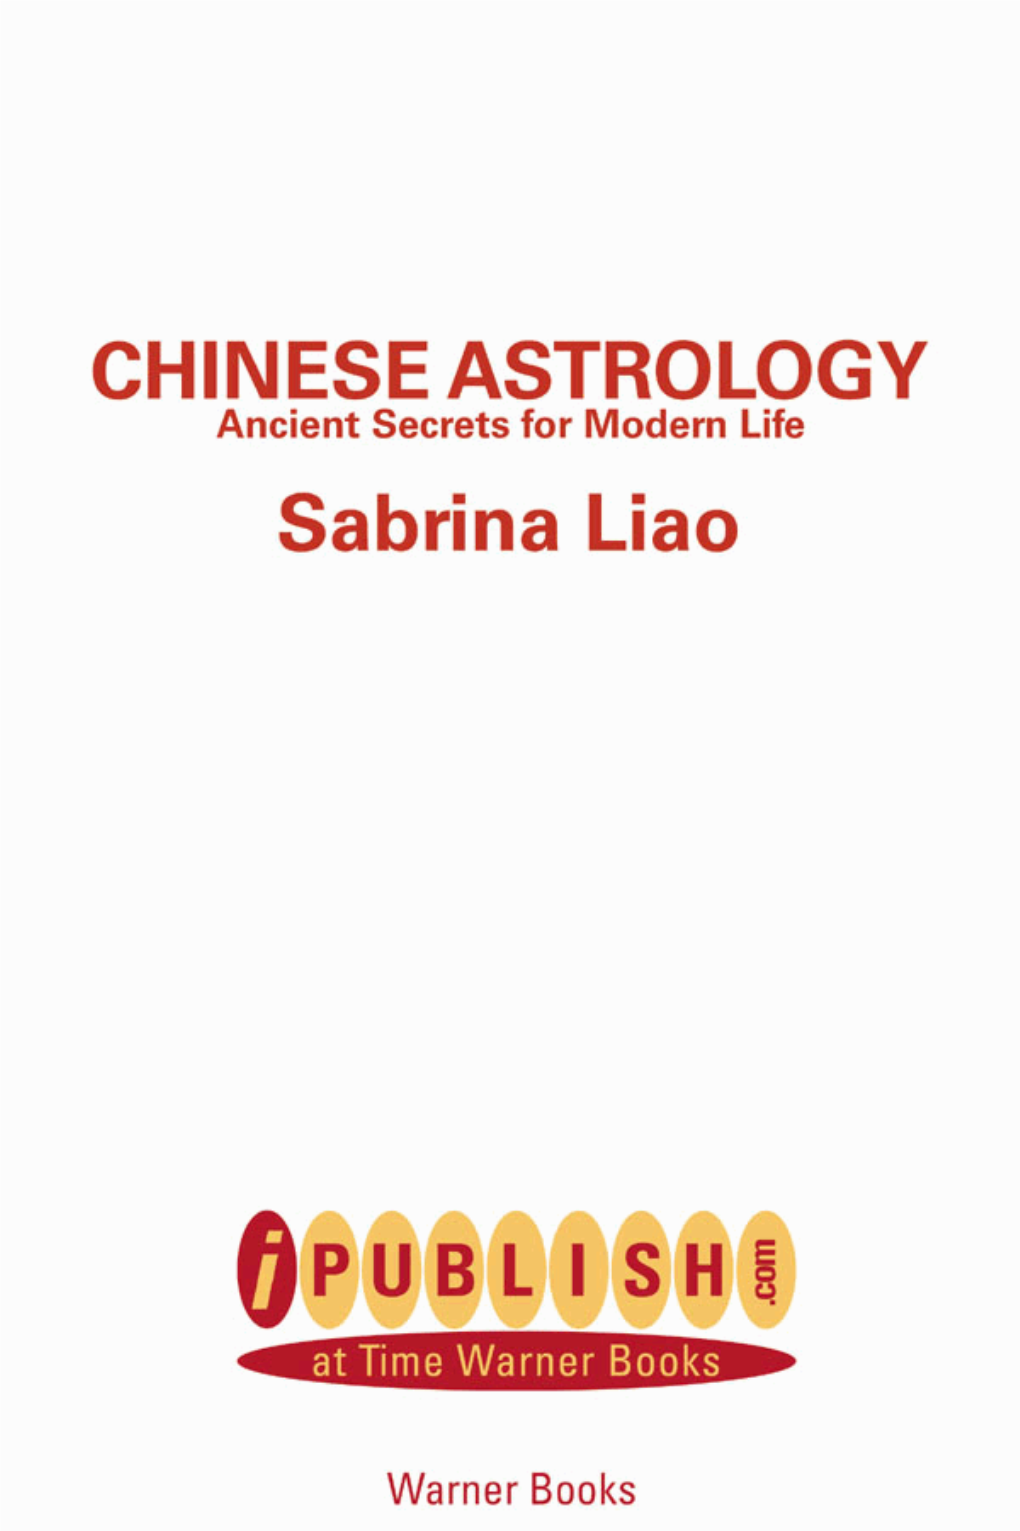 Chinese Astrology 11/7/00 9:33 AM Page I